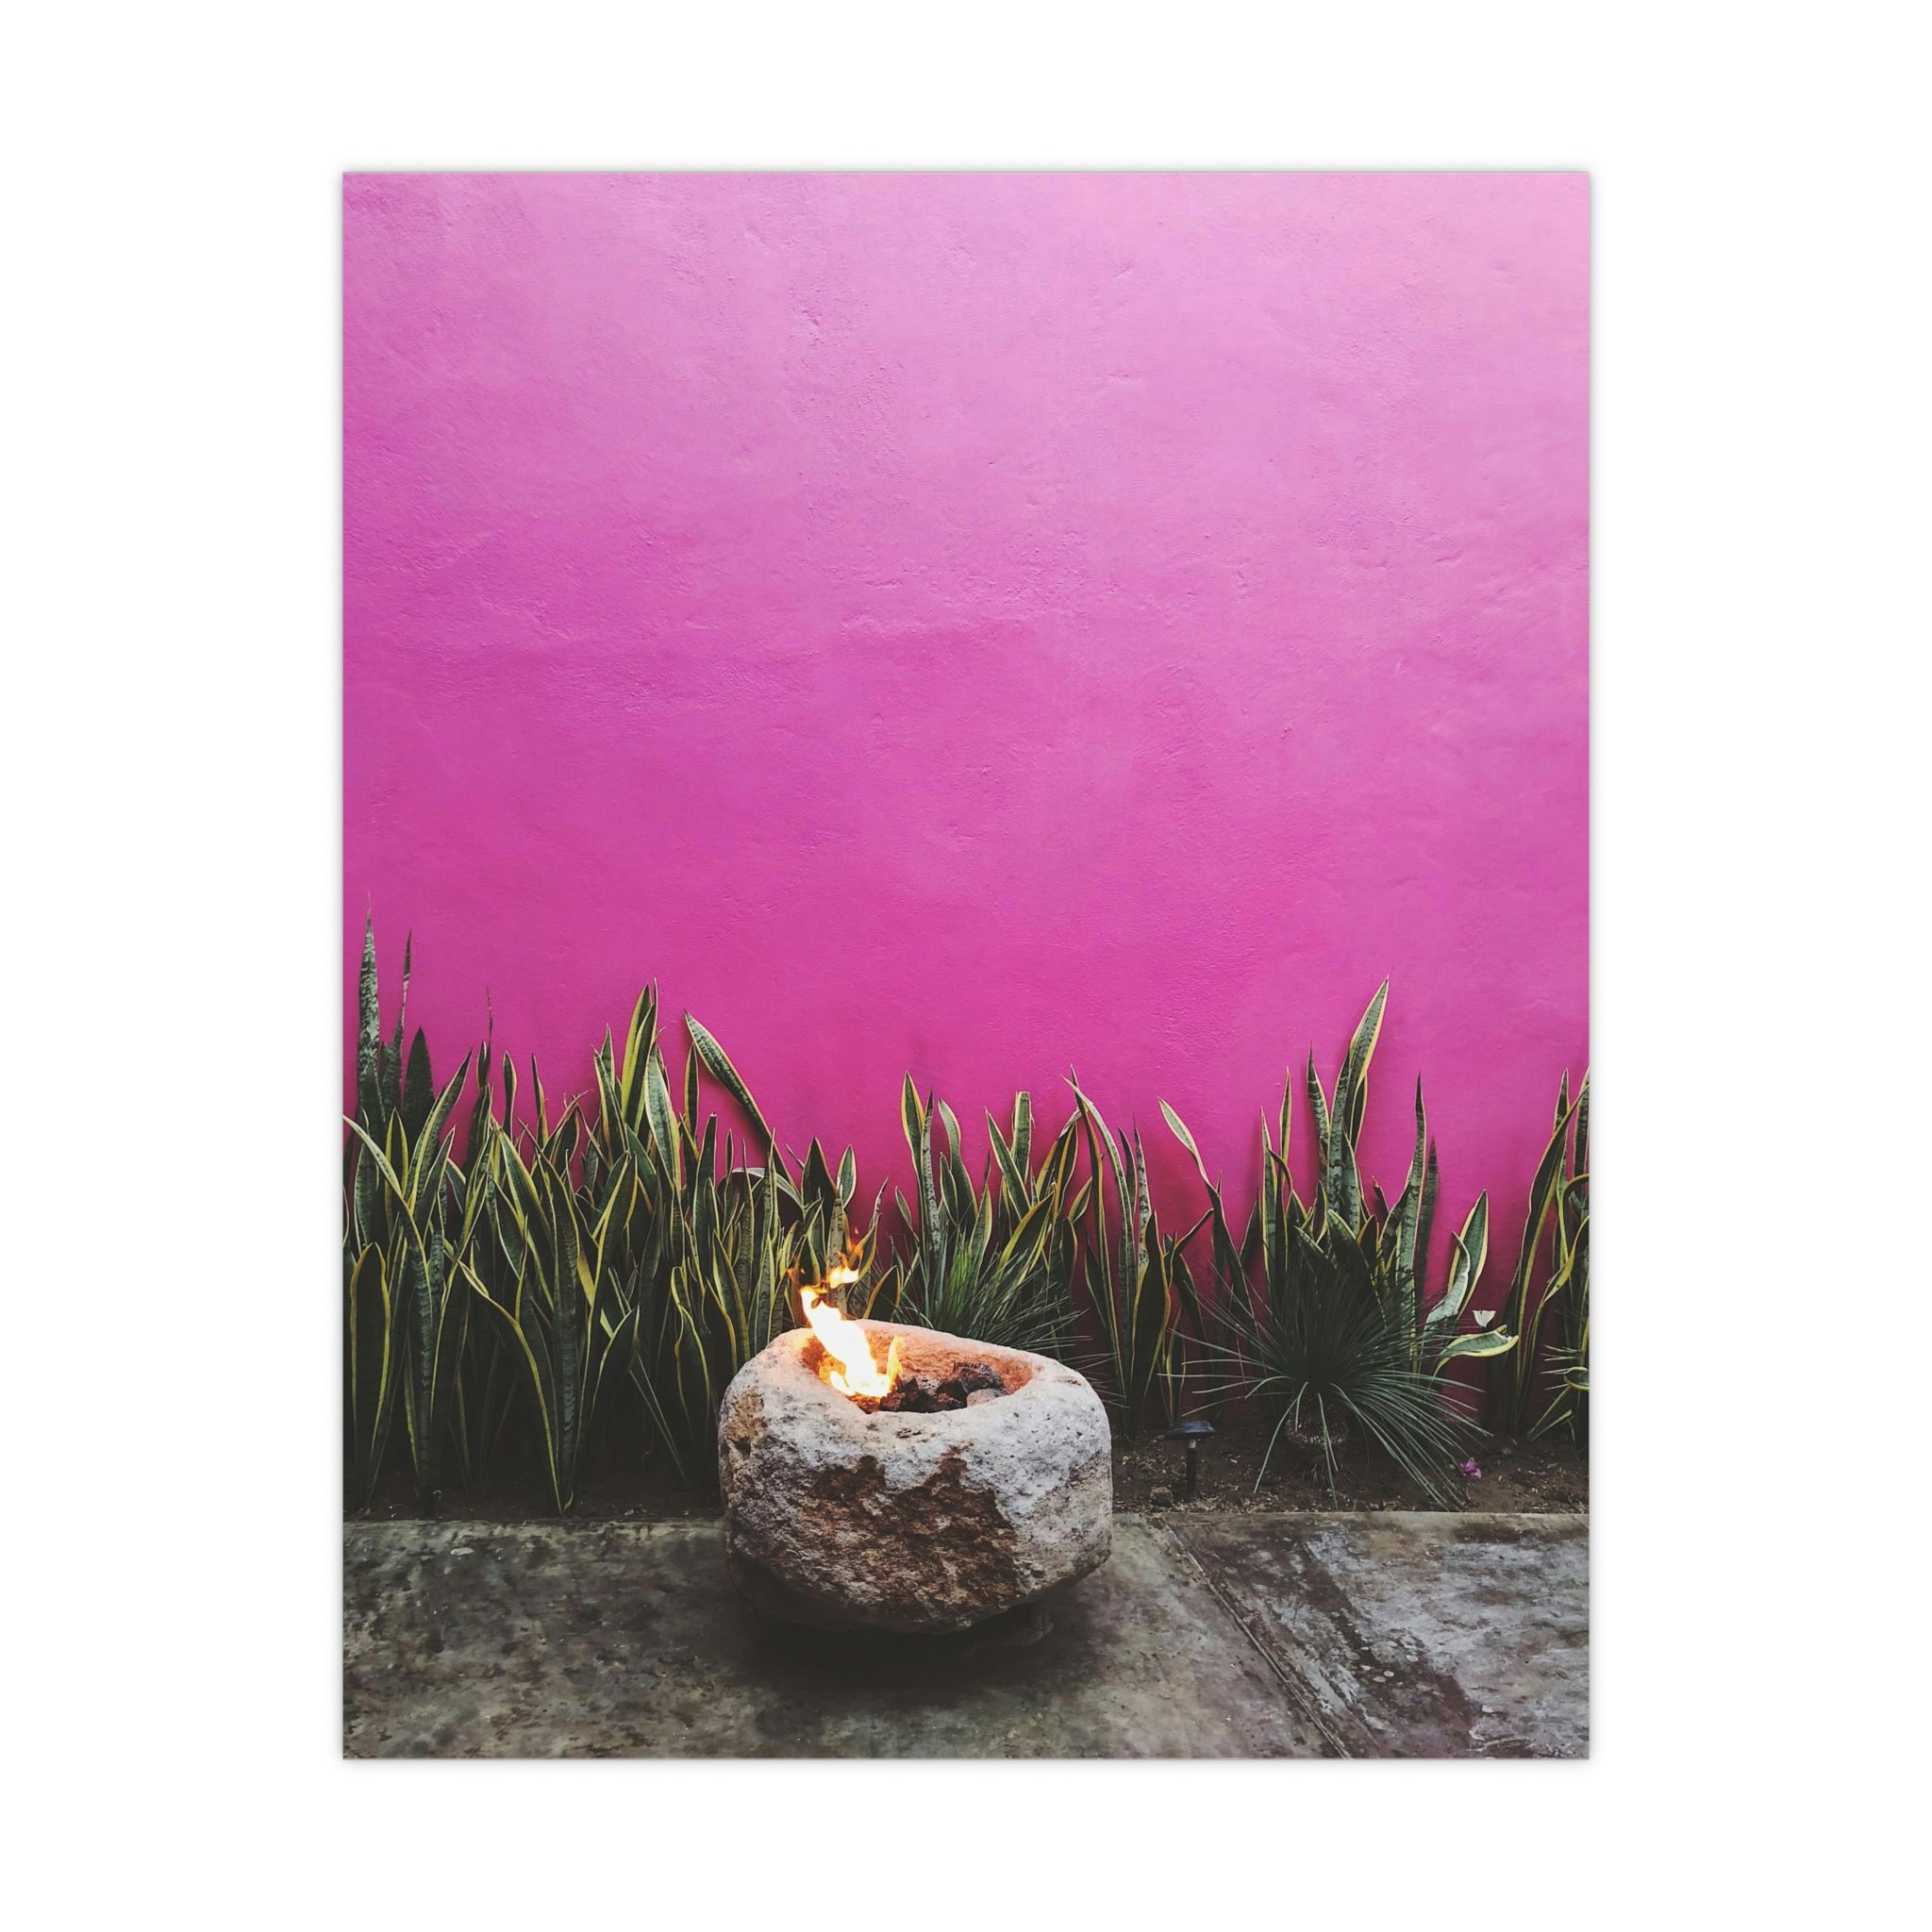 Hot Pink painted wall and organic green - Original photo print on Premium Matte Posters